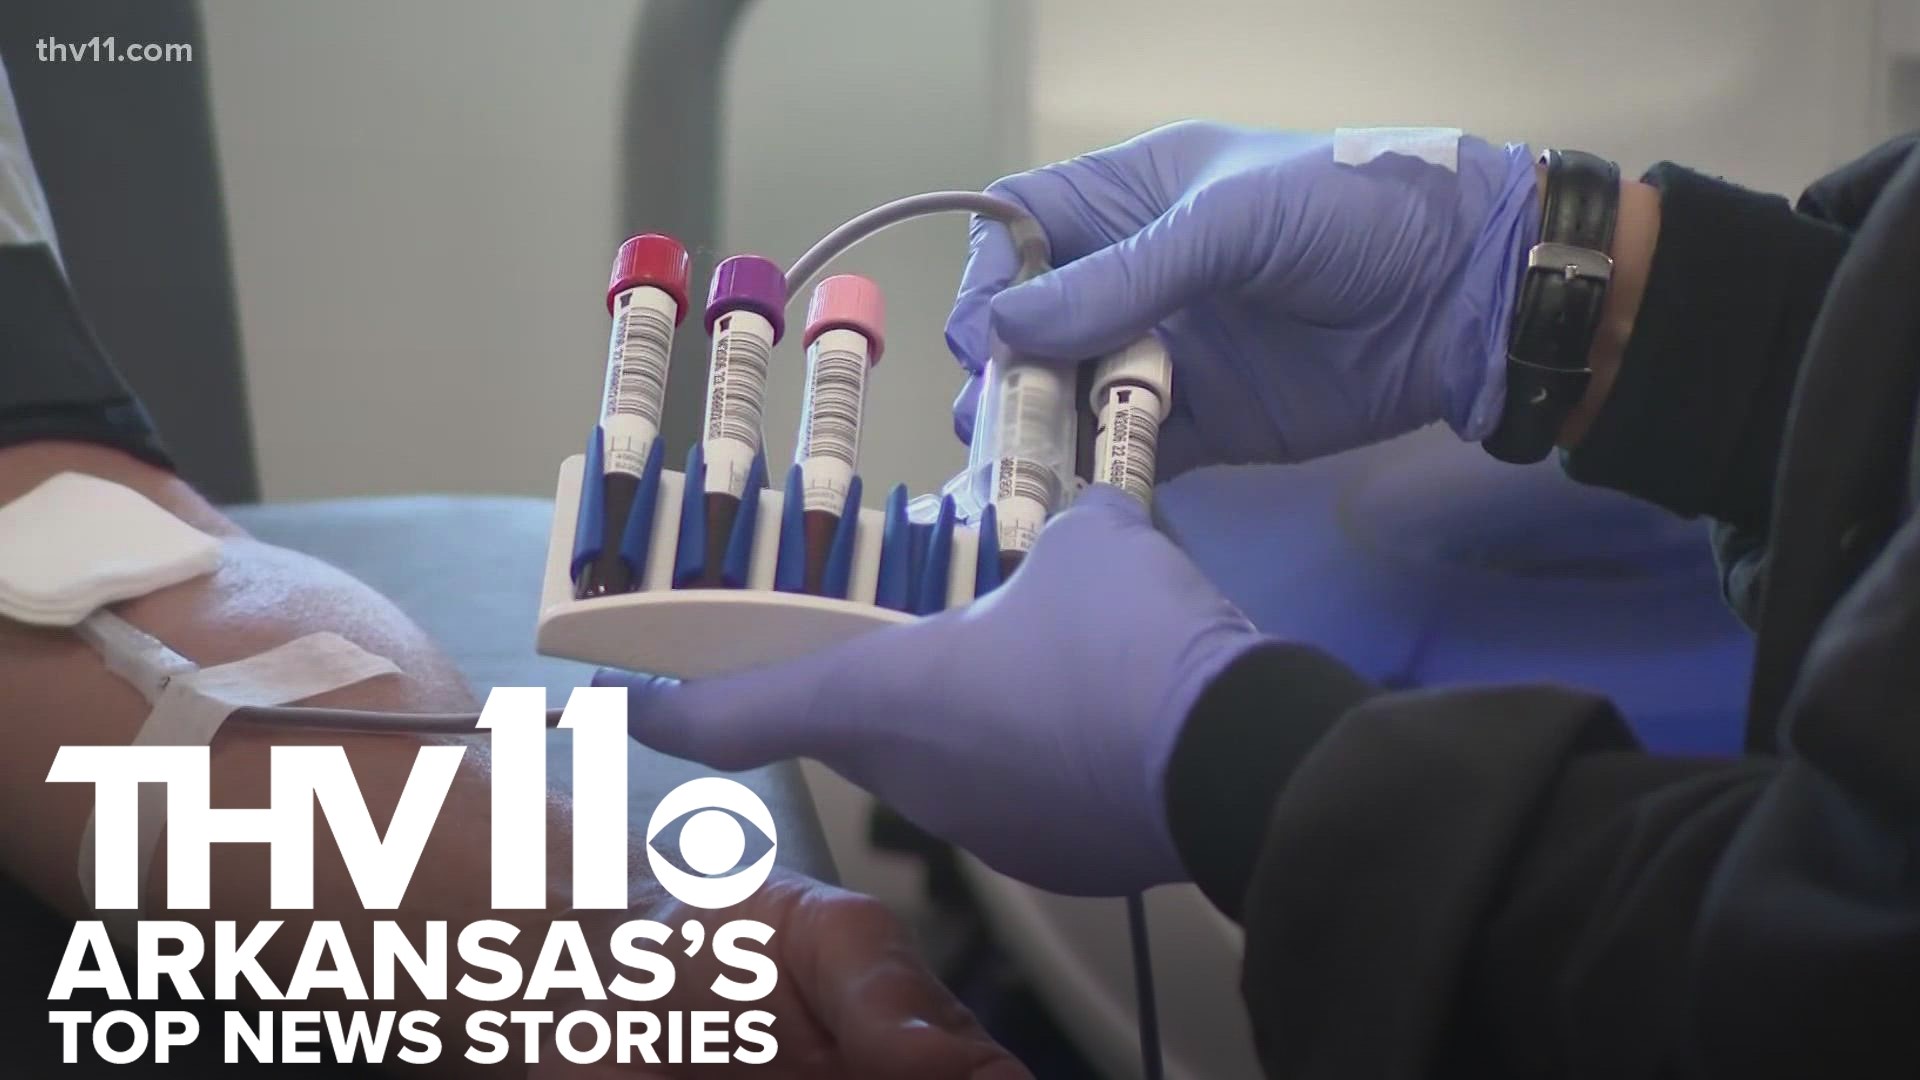 Sarah Horbacewicz delivers Arkansas's top news stories for December 4, 2022, including the FDA moving to ease restrictions on blood donations.